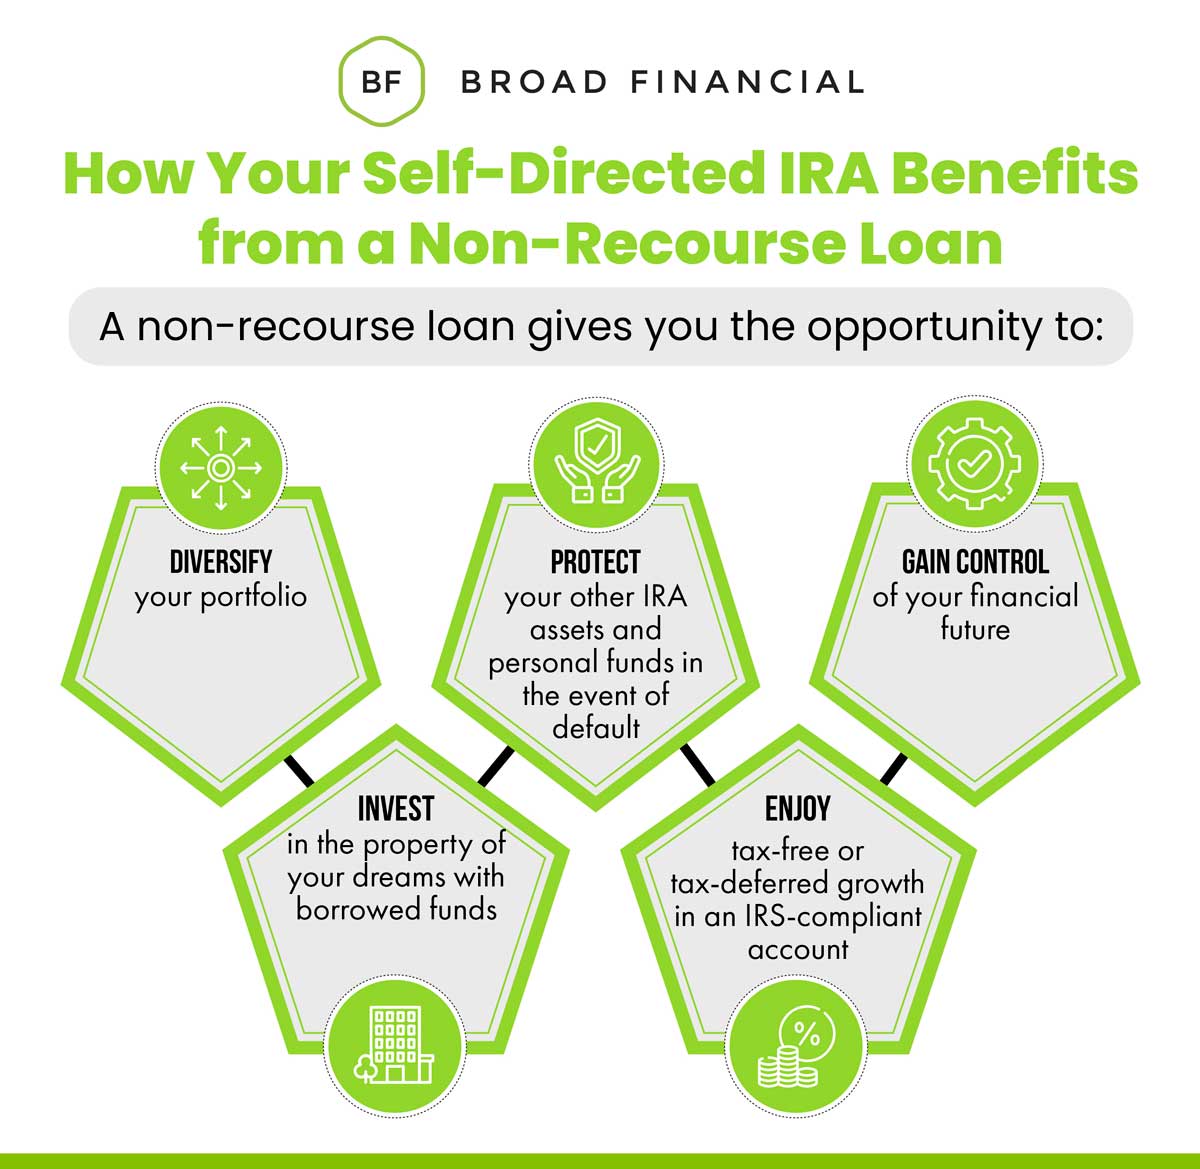 How Your Self-Directed IRA Benefits from a Non-Recourse Loan Infographic. A non-recourse loan gives you the opportunity to: - Diversify your portolio - Invest in the property of your dreams with borrowed funds - Protect your other IRA assets and personal funds in the event of default - Enjoy tax-free or tax-deferred growth in an IRS-compliant account - Gain control of your financial future